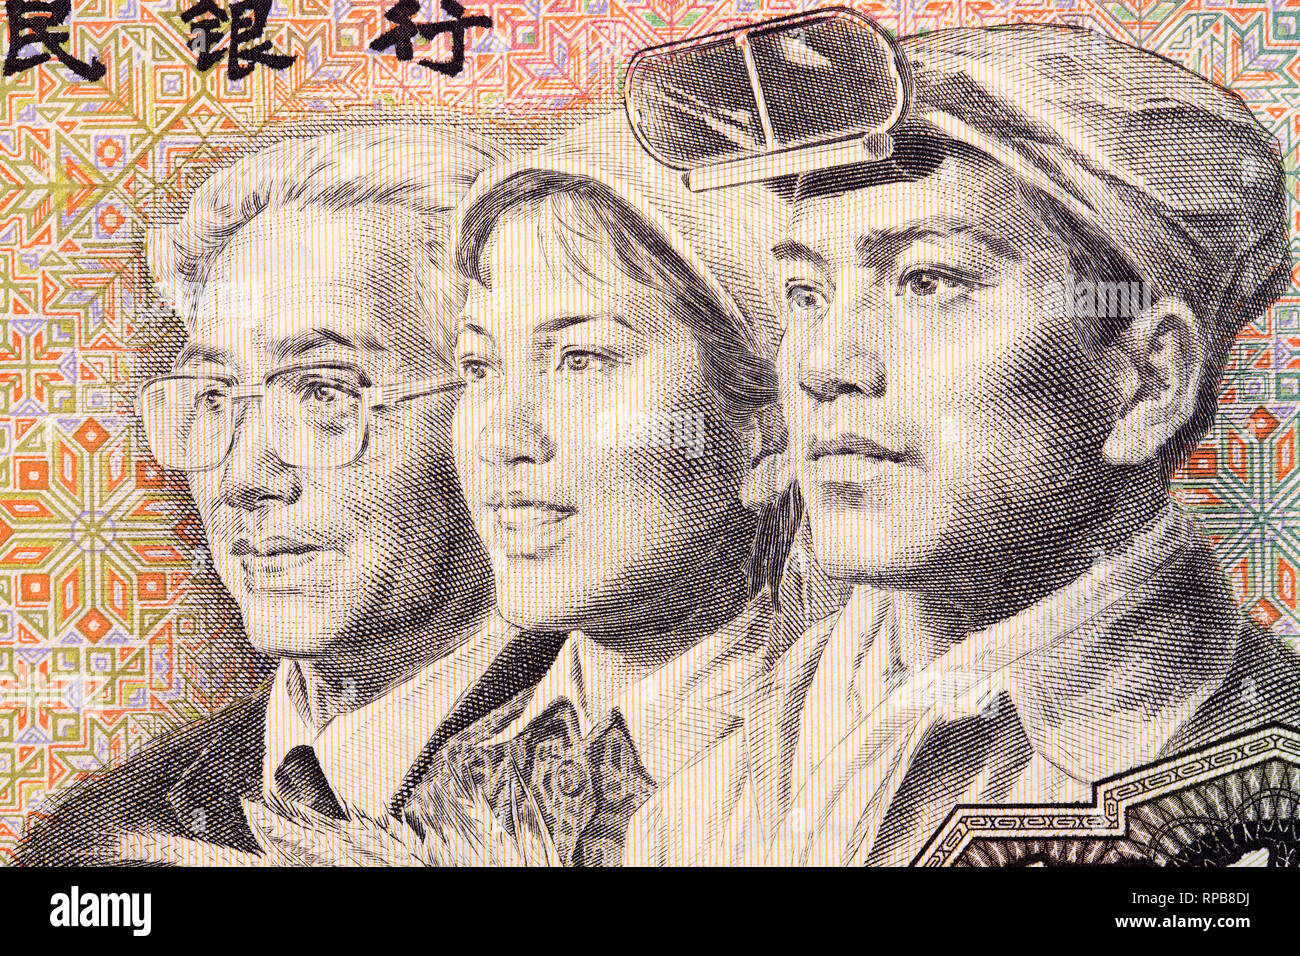 Professionals a portrait from Chinese money Stock Photo